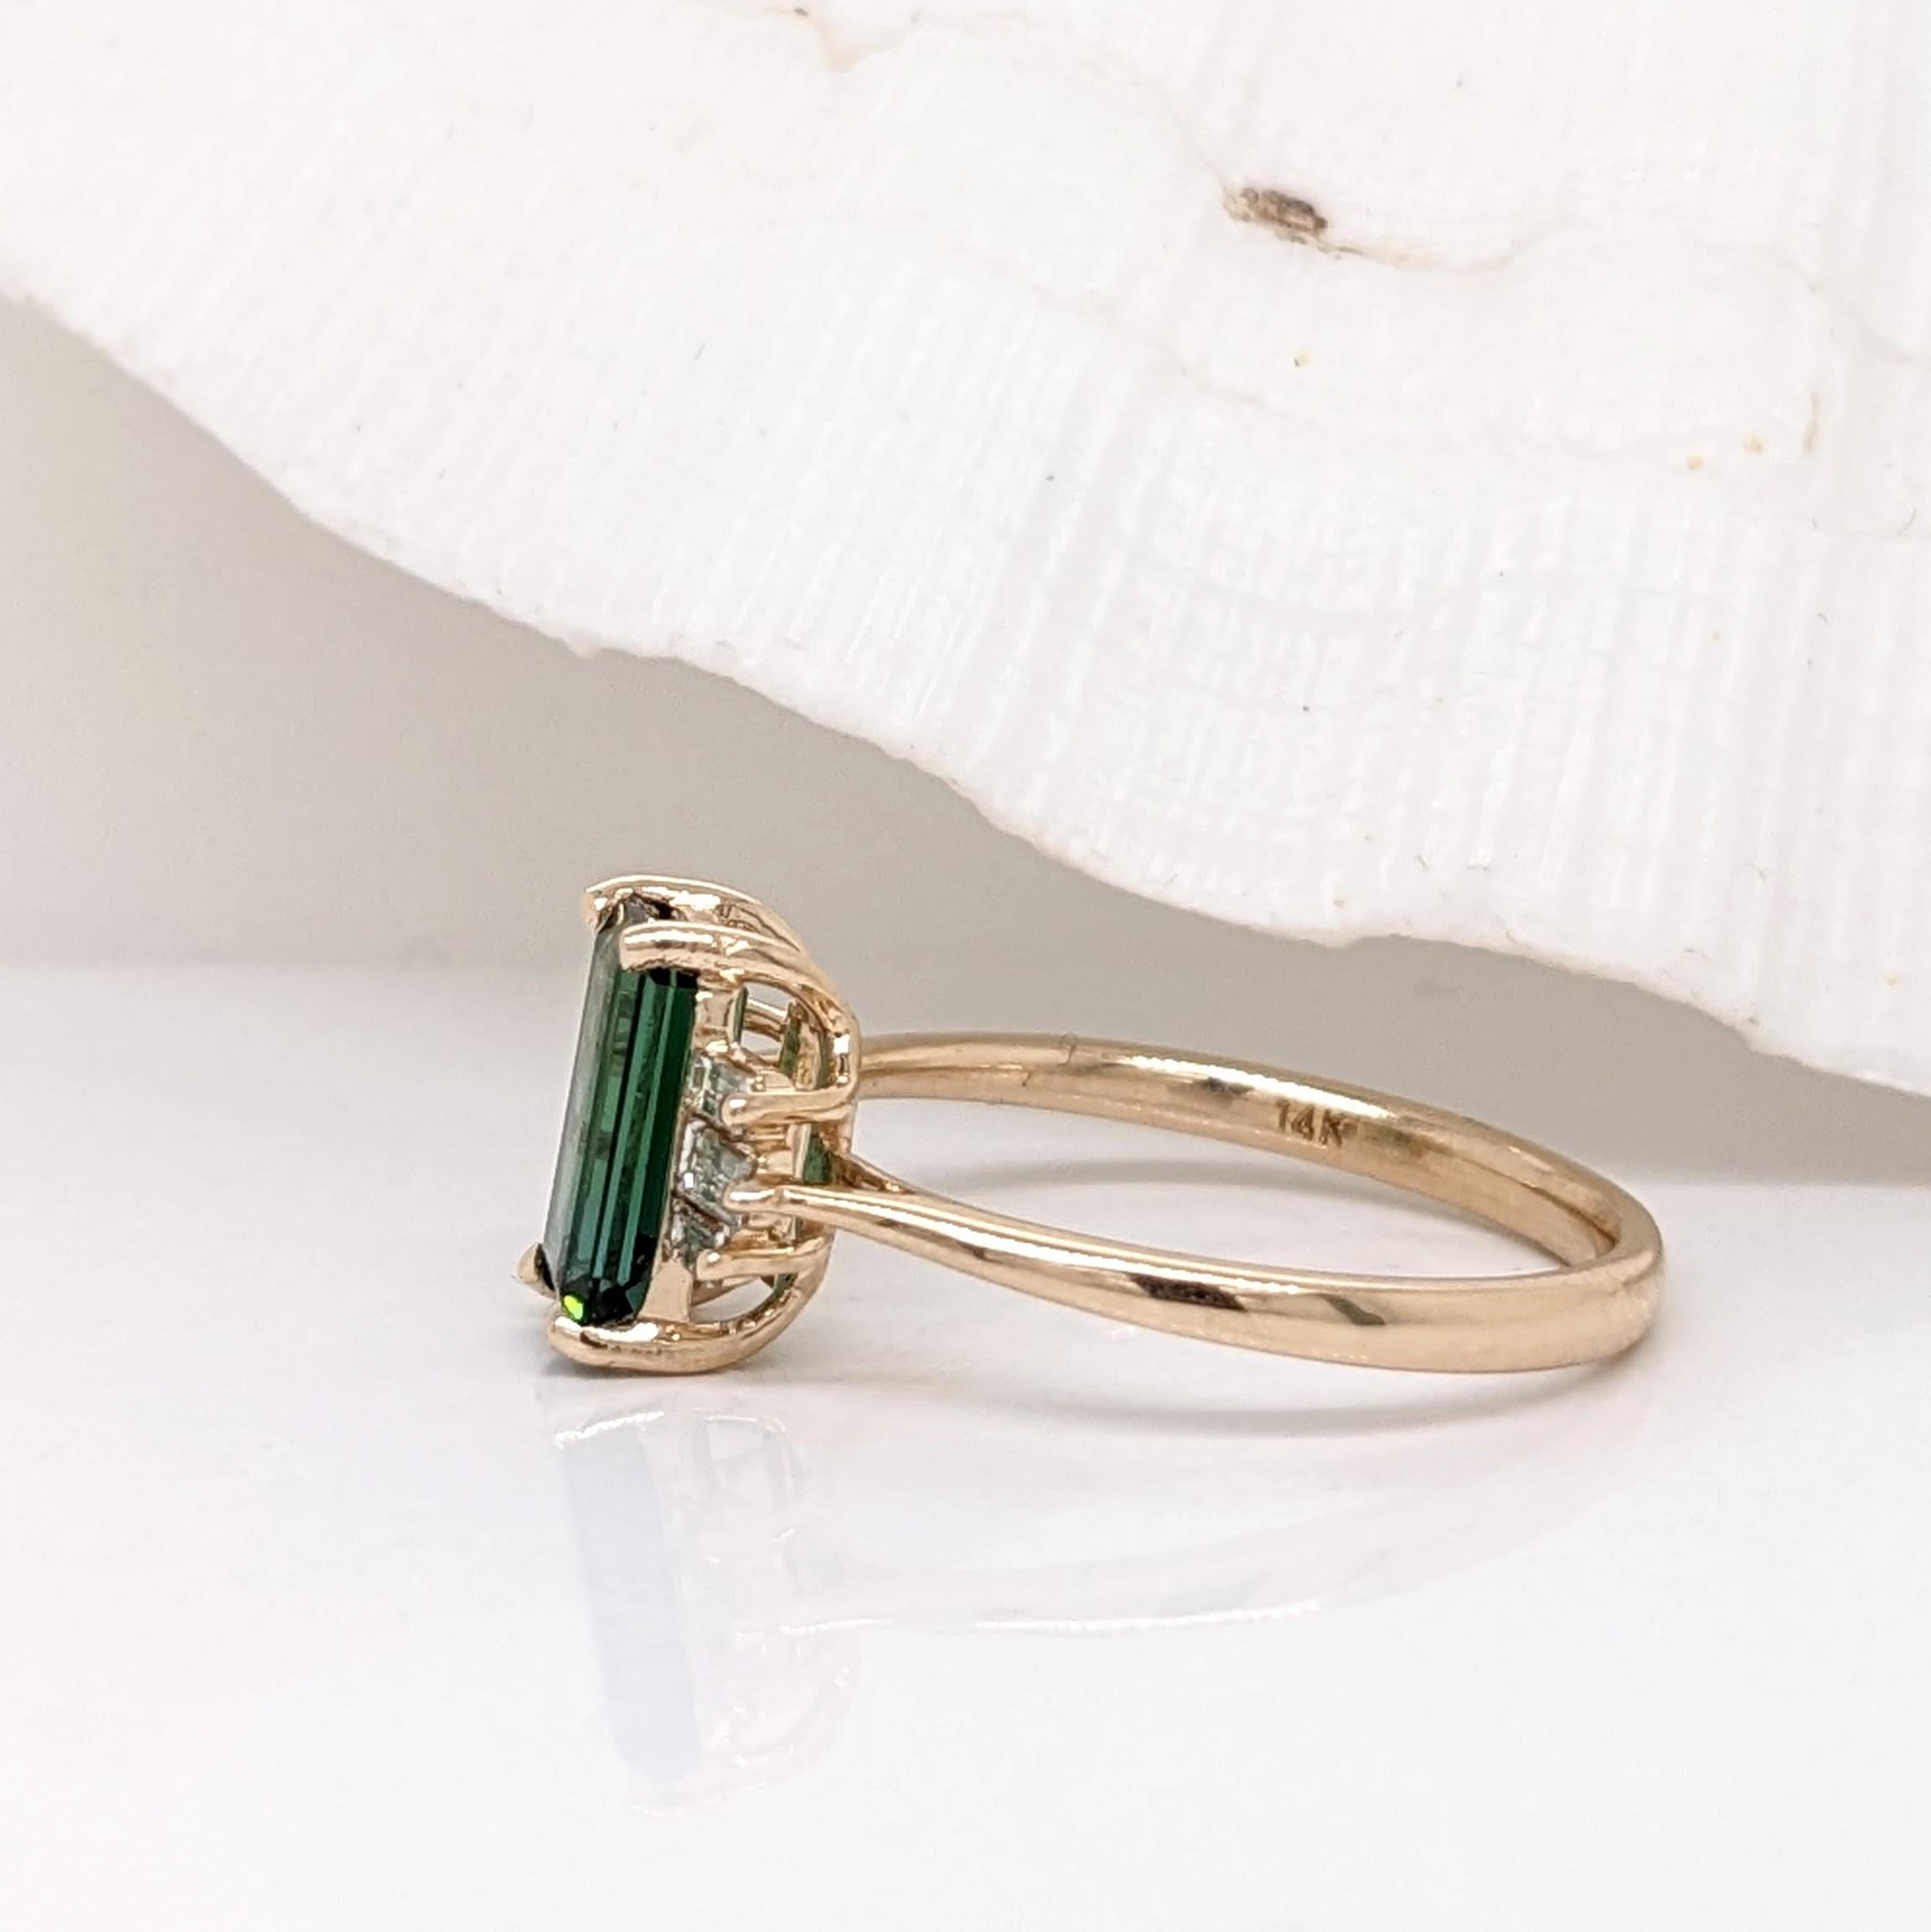 Emerald Cut 1.2ct Tourmaline Ring w Diamond Accents in 14K Solid Yellow Gold Emerald 9x5mm For Sale